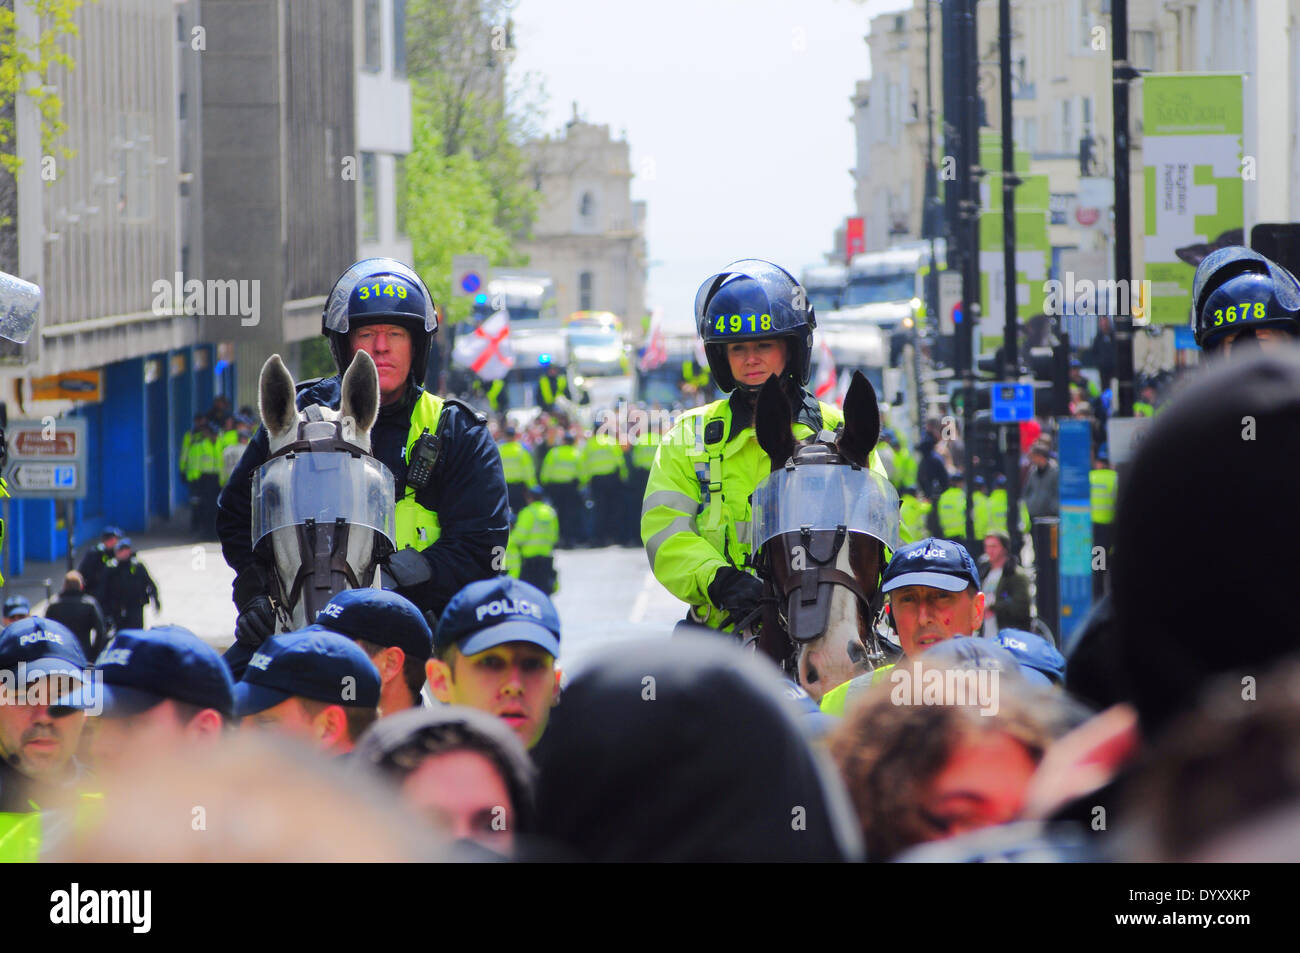 Brighton, East Sussex, UK..27 April 2014..The centre of Brighton was brought to a standstill this afternoon as Police kept rival factions apart. About 150 marchers were outnumbered by Police and those opposed to the March. Stock Photo